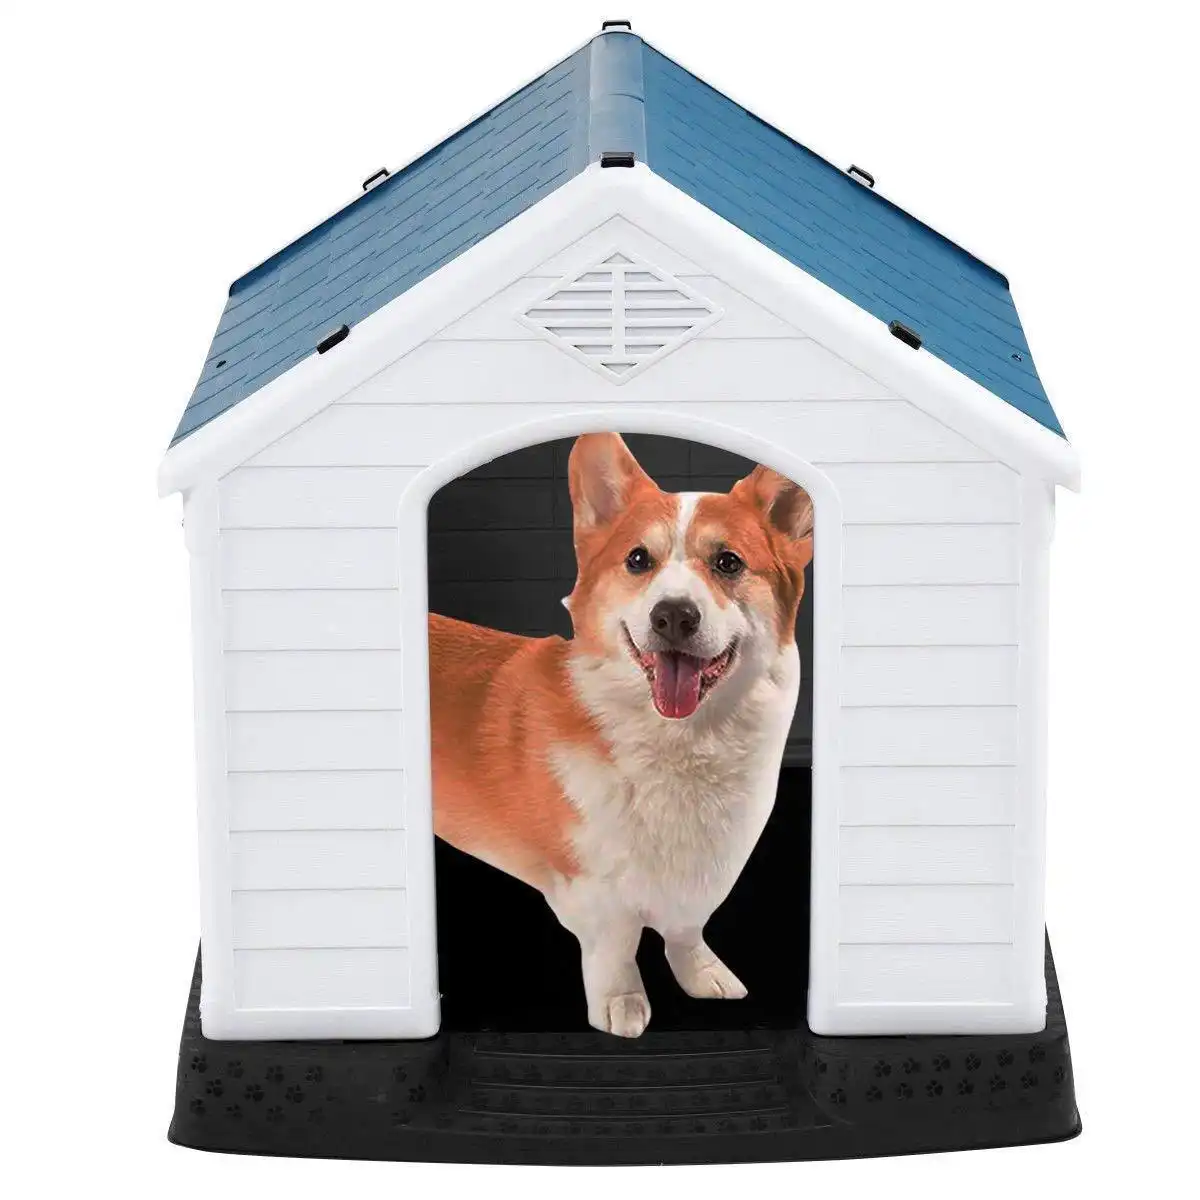 39" Plastic Dog House Waterproof Pet Shelter - up to 80lb